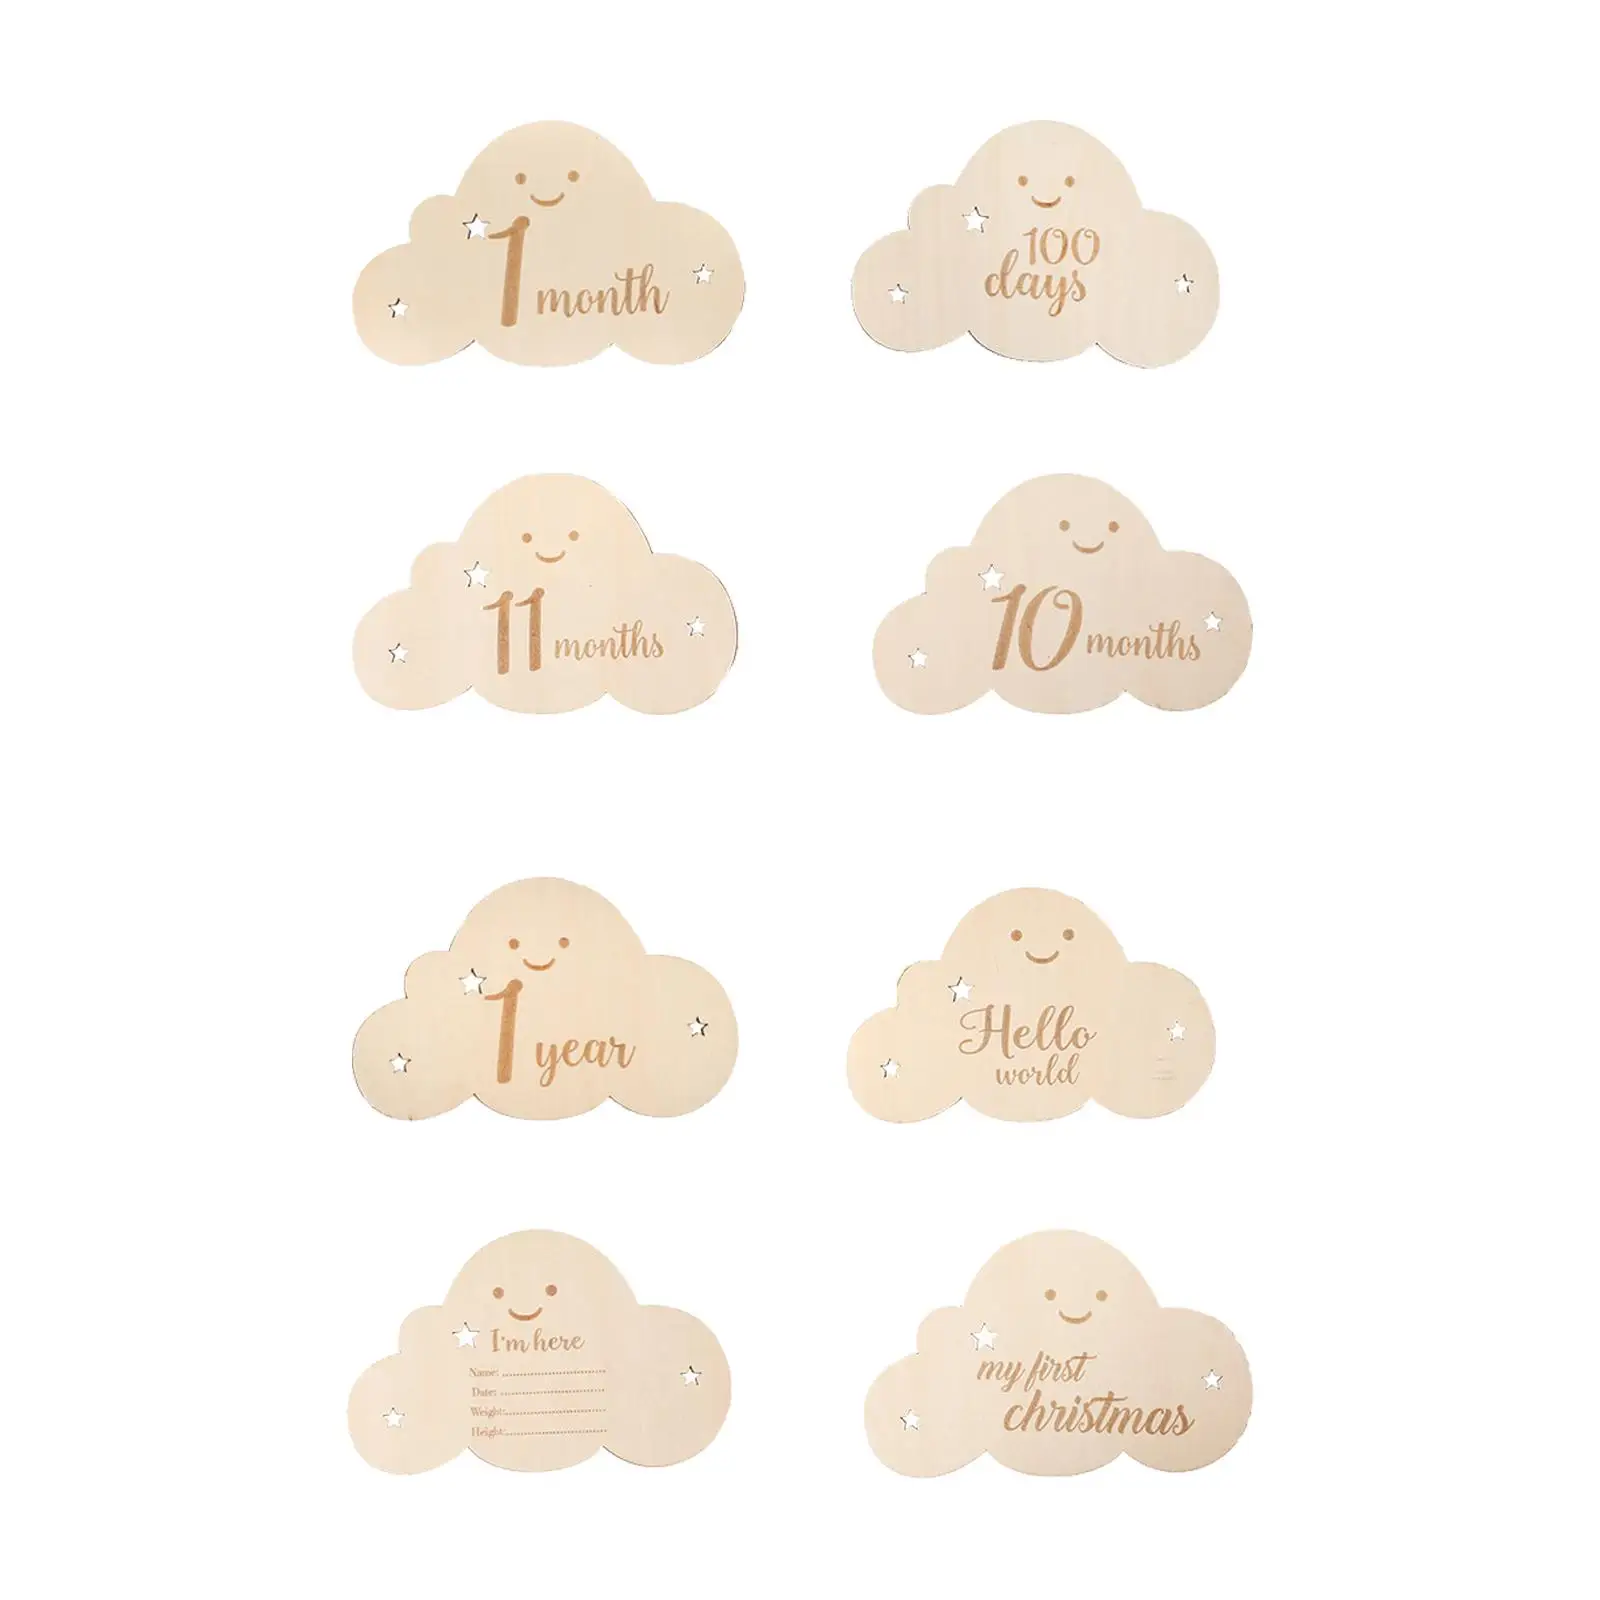 8Pcs Wooden Baby Milestone Cards Smooth Surface Clouds Shape Double Sided Photo Prop Cards Monthly Stickers Newborn Gifts